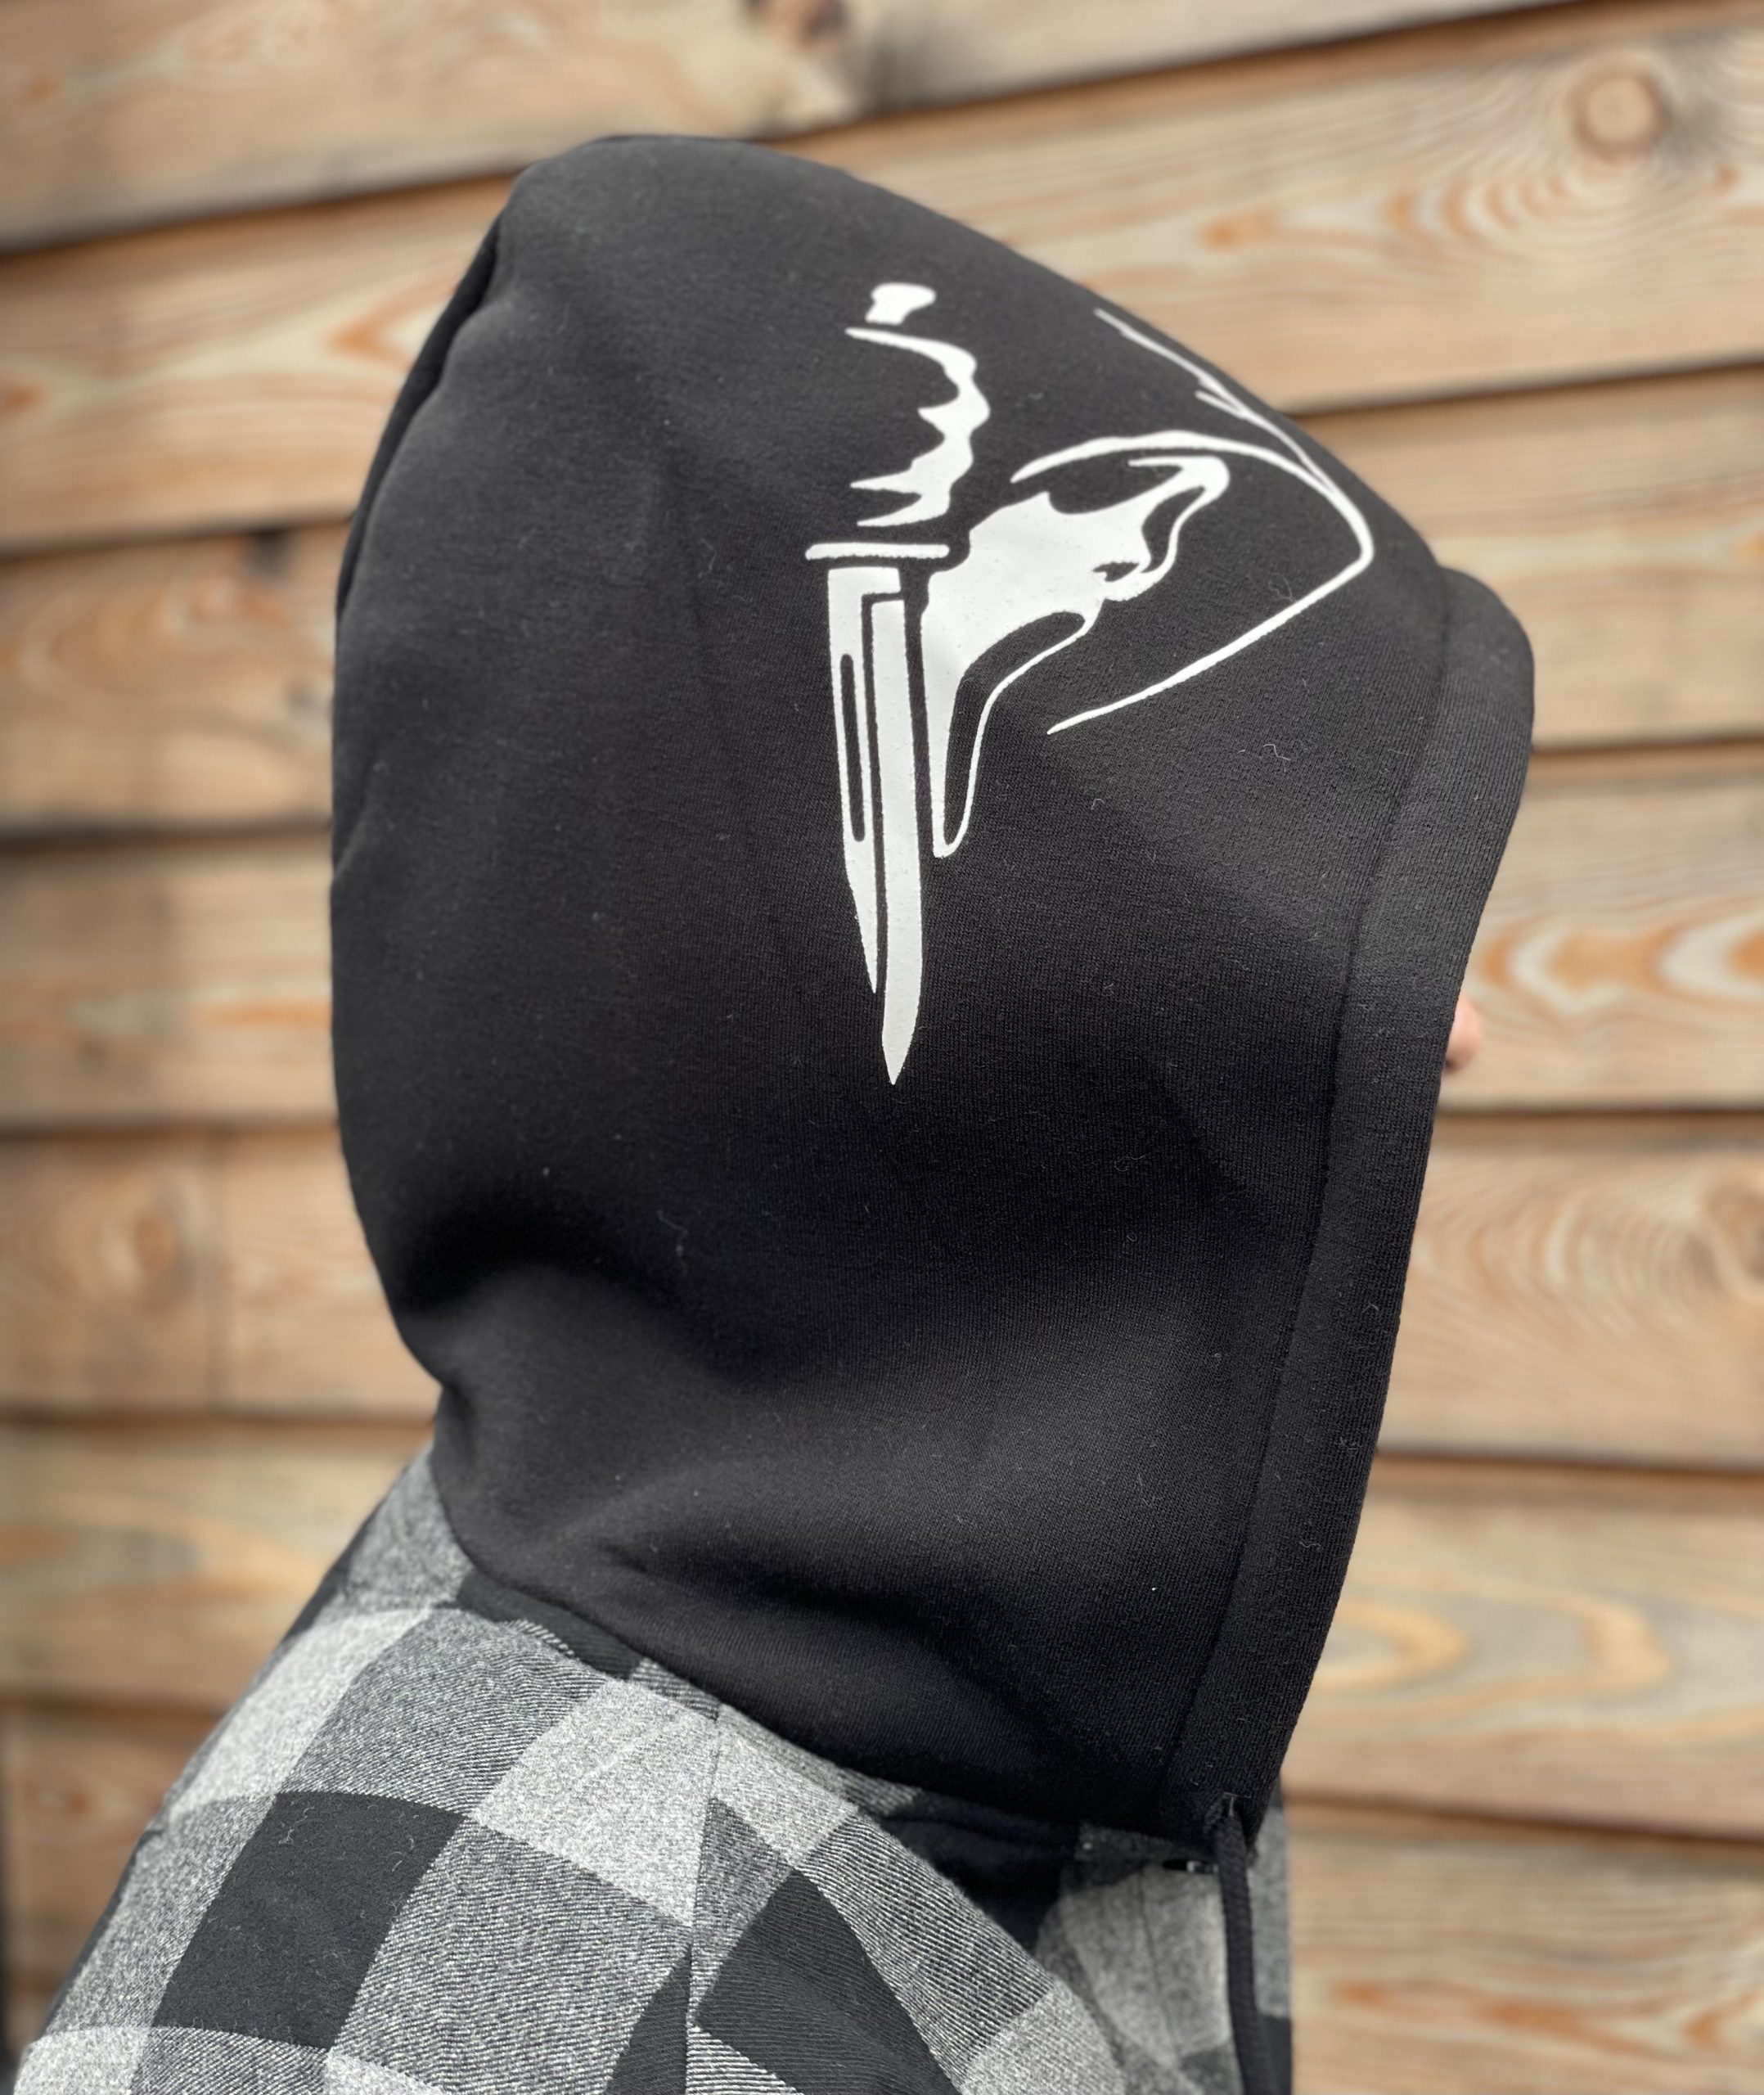 Ghost Face Hooded Flannel